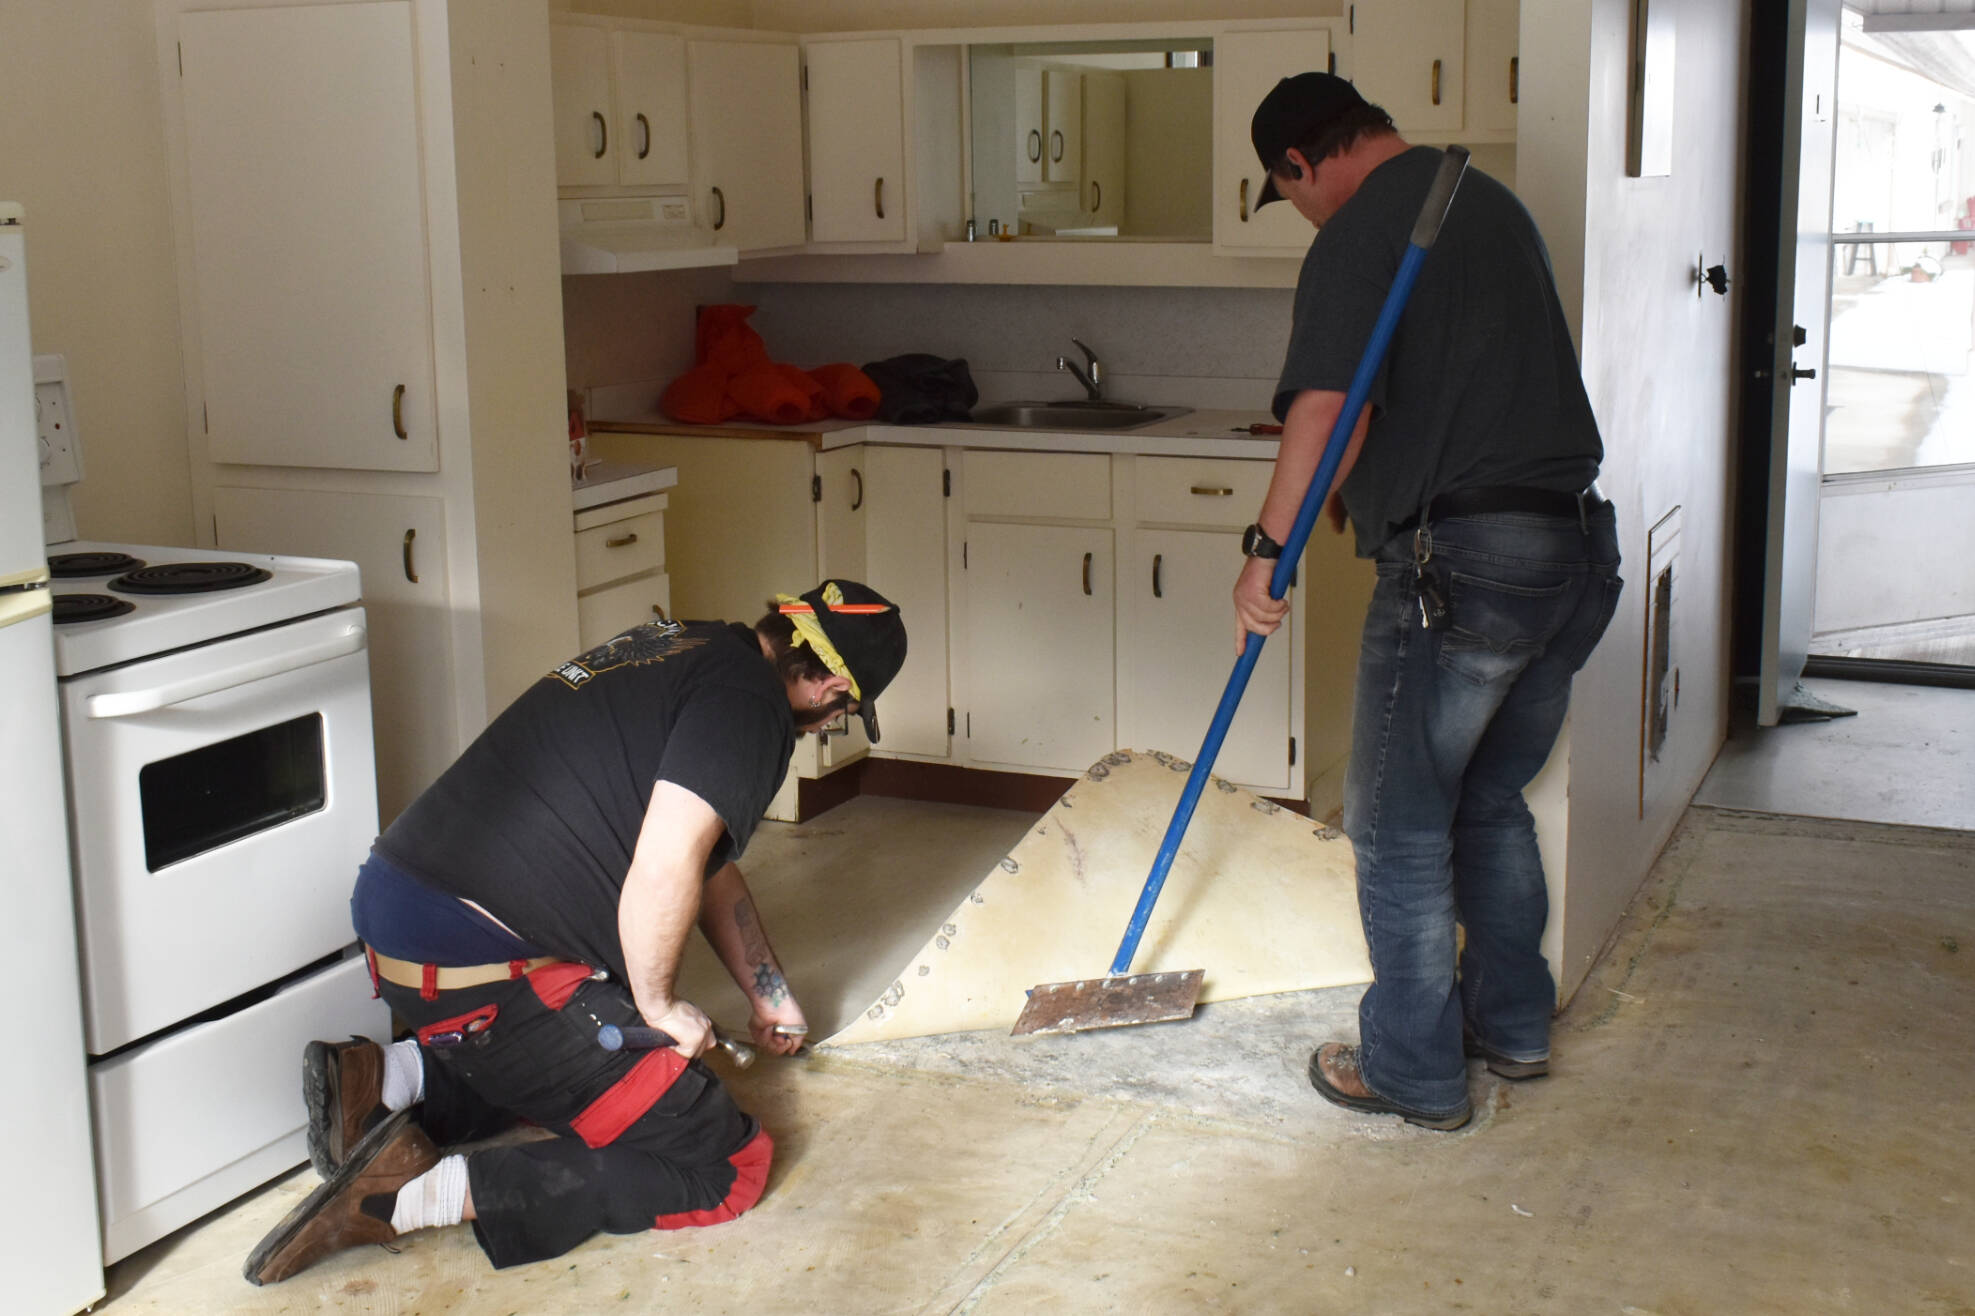 Jeff VanDooyeweert and Chris Wilson pull up laminate flooring in the kitchen of a unit at The Haven seniors’ living complex in Sicamous as it undergoes a renovation Saturday, Feb. 4, 2023. (Rebecca Willson- Eagle Valley News)